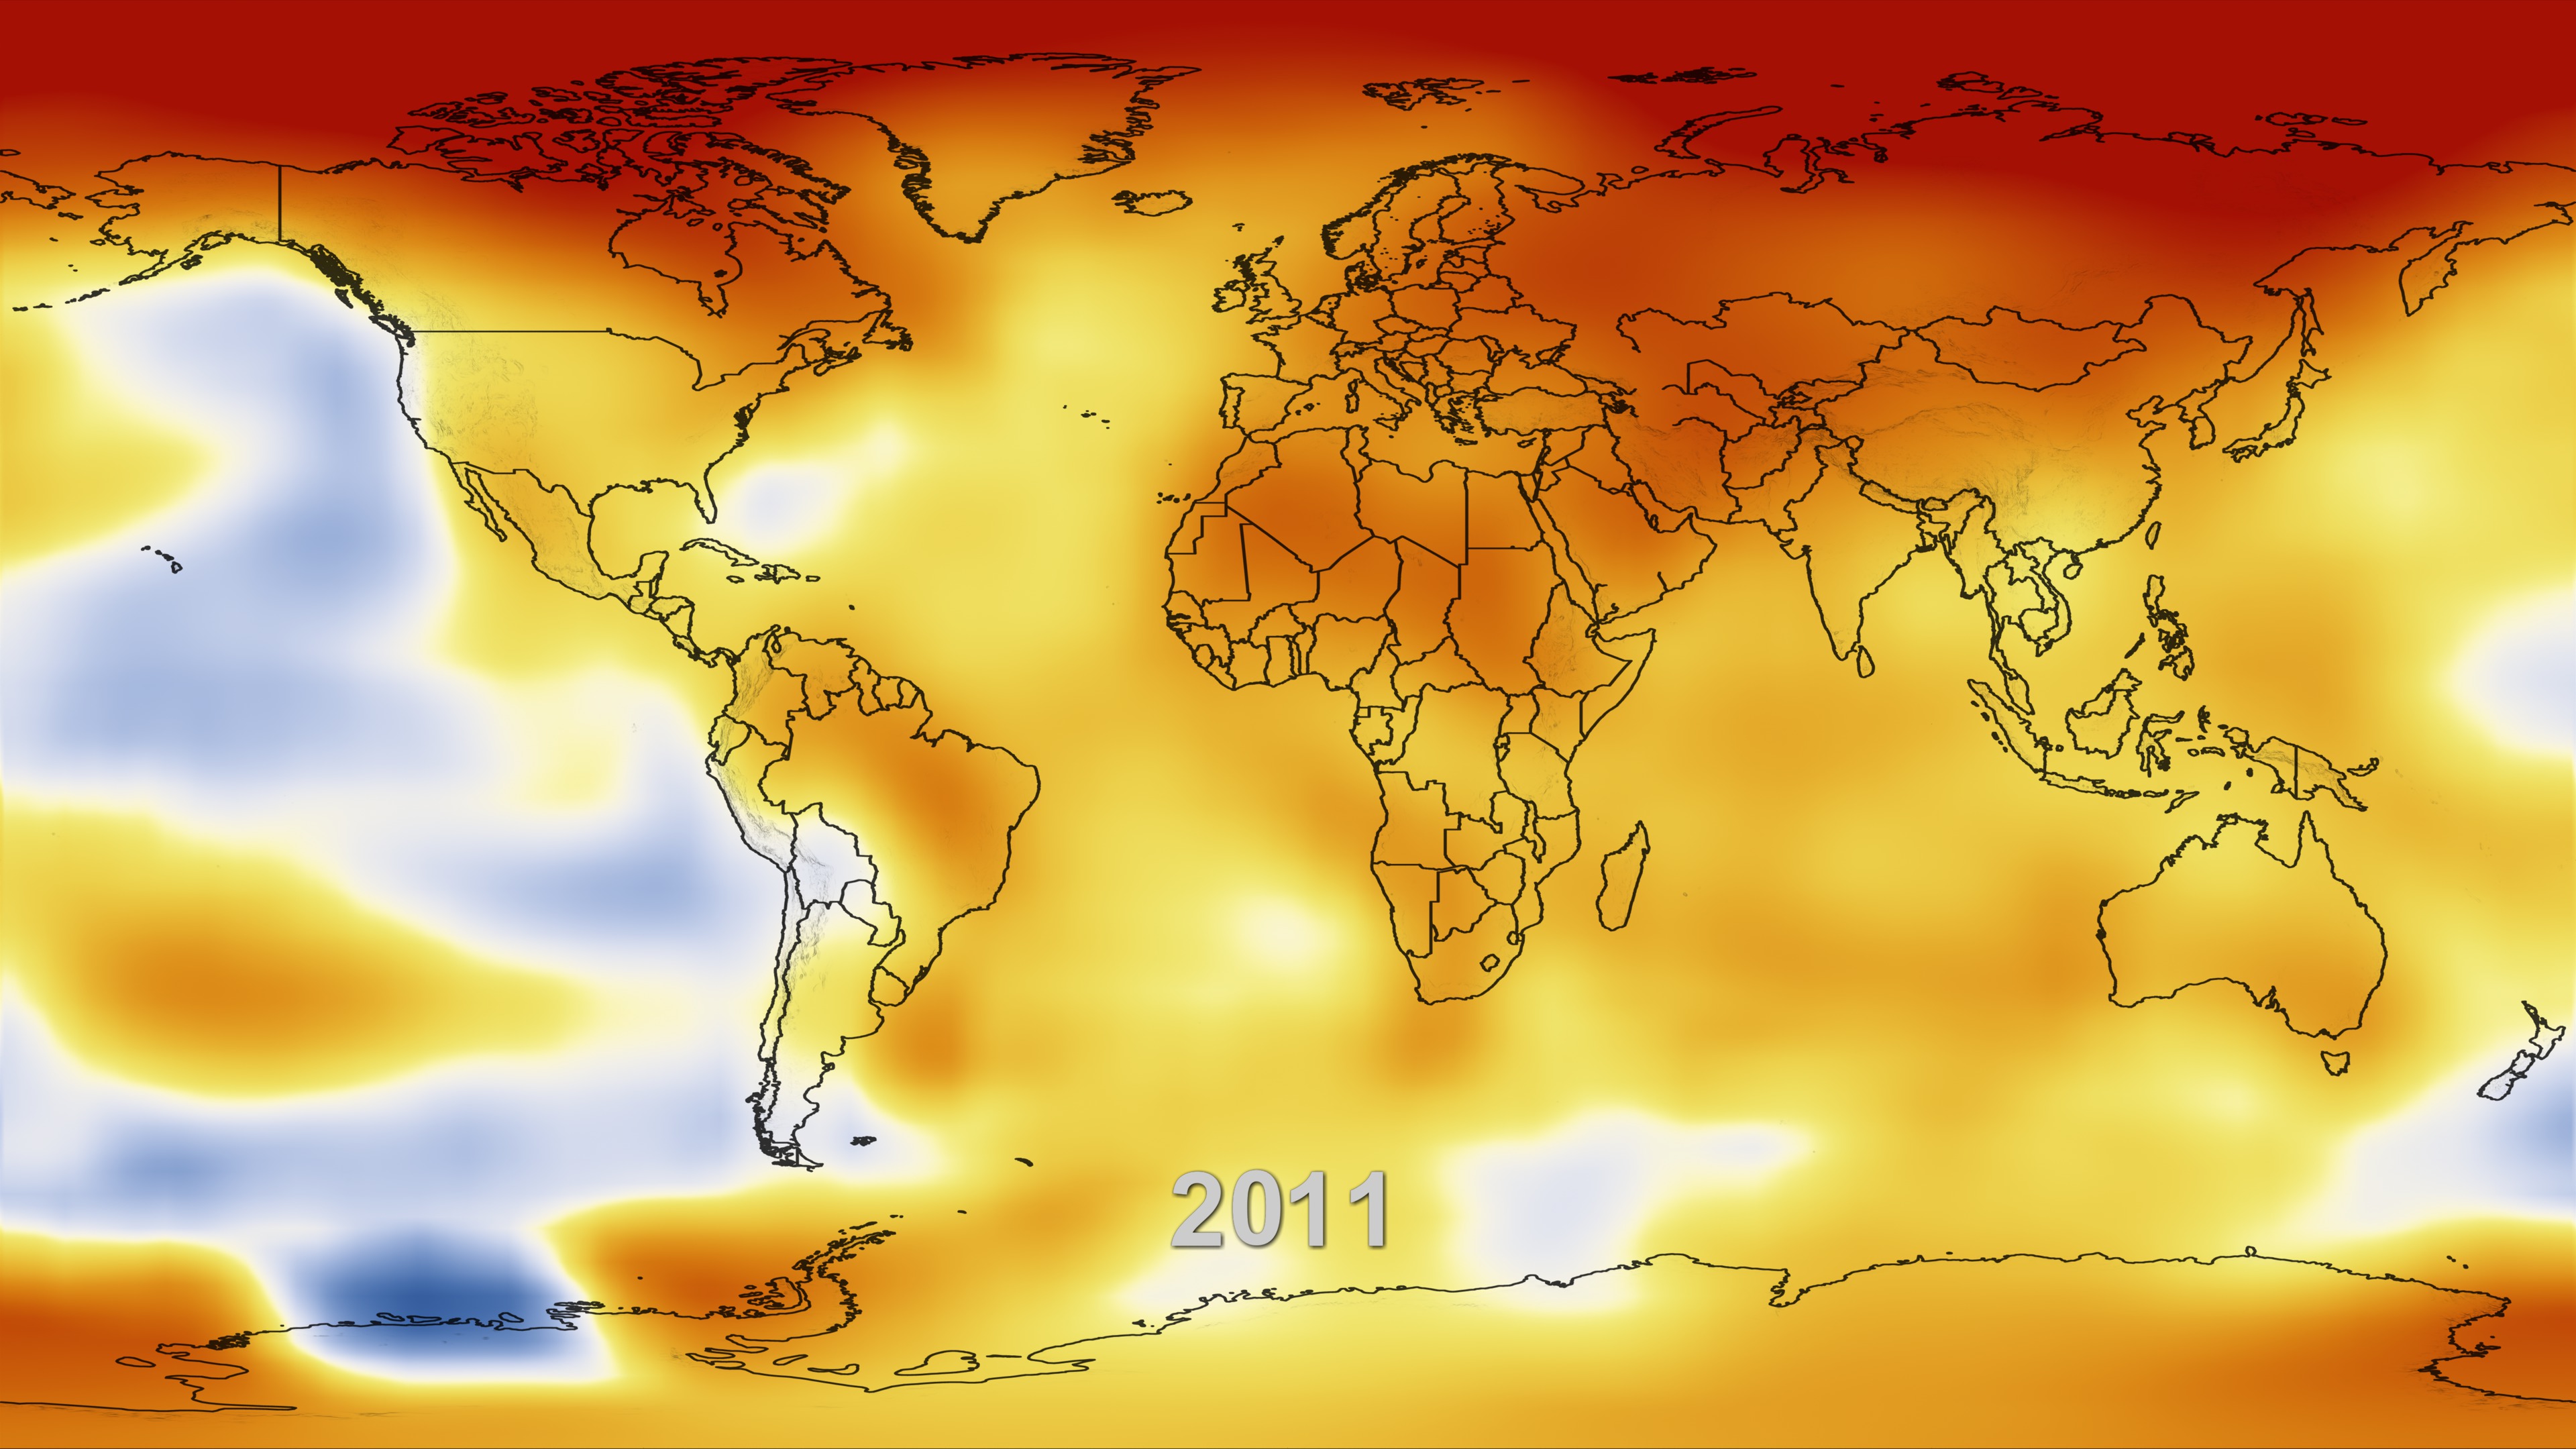 This color-coded map displays a progression of changing global surface temperatures anomalies from 1880 through 2011. The final frame represents global temperature anomalies averaged from 2007 to 2011.